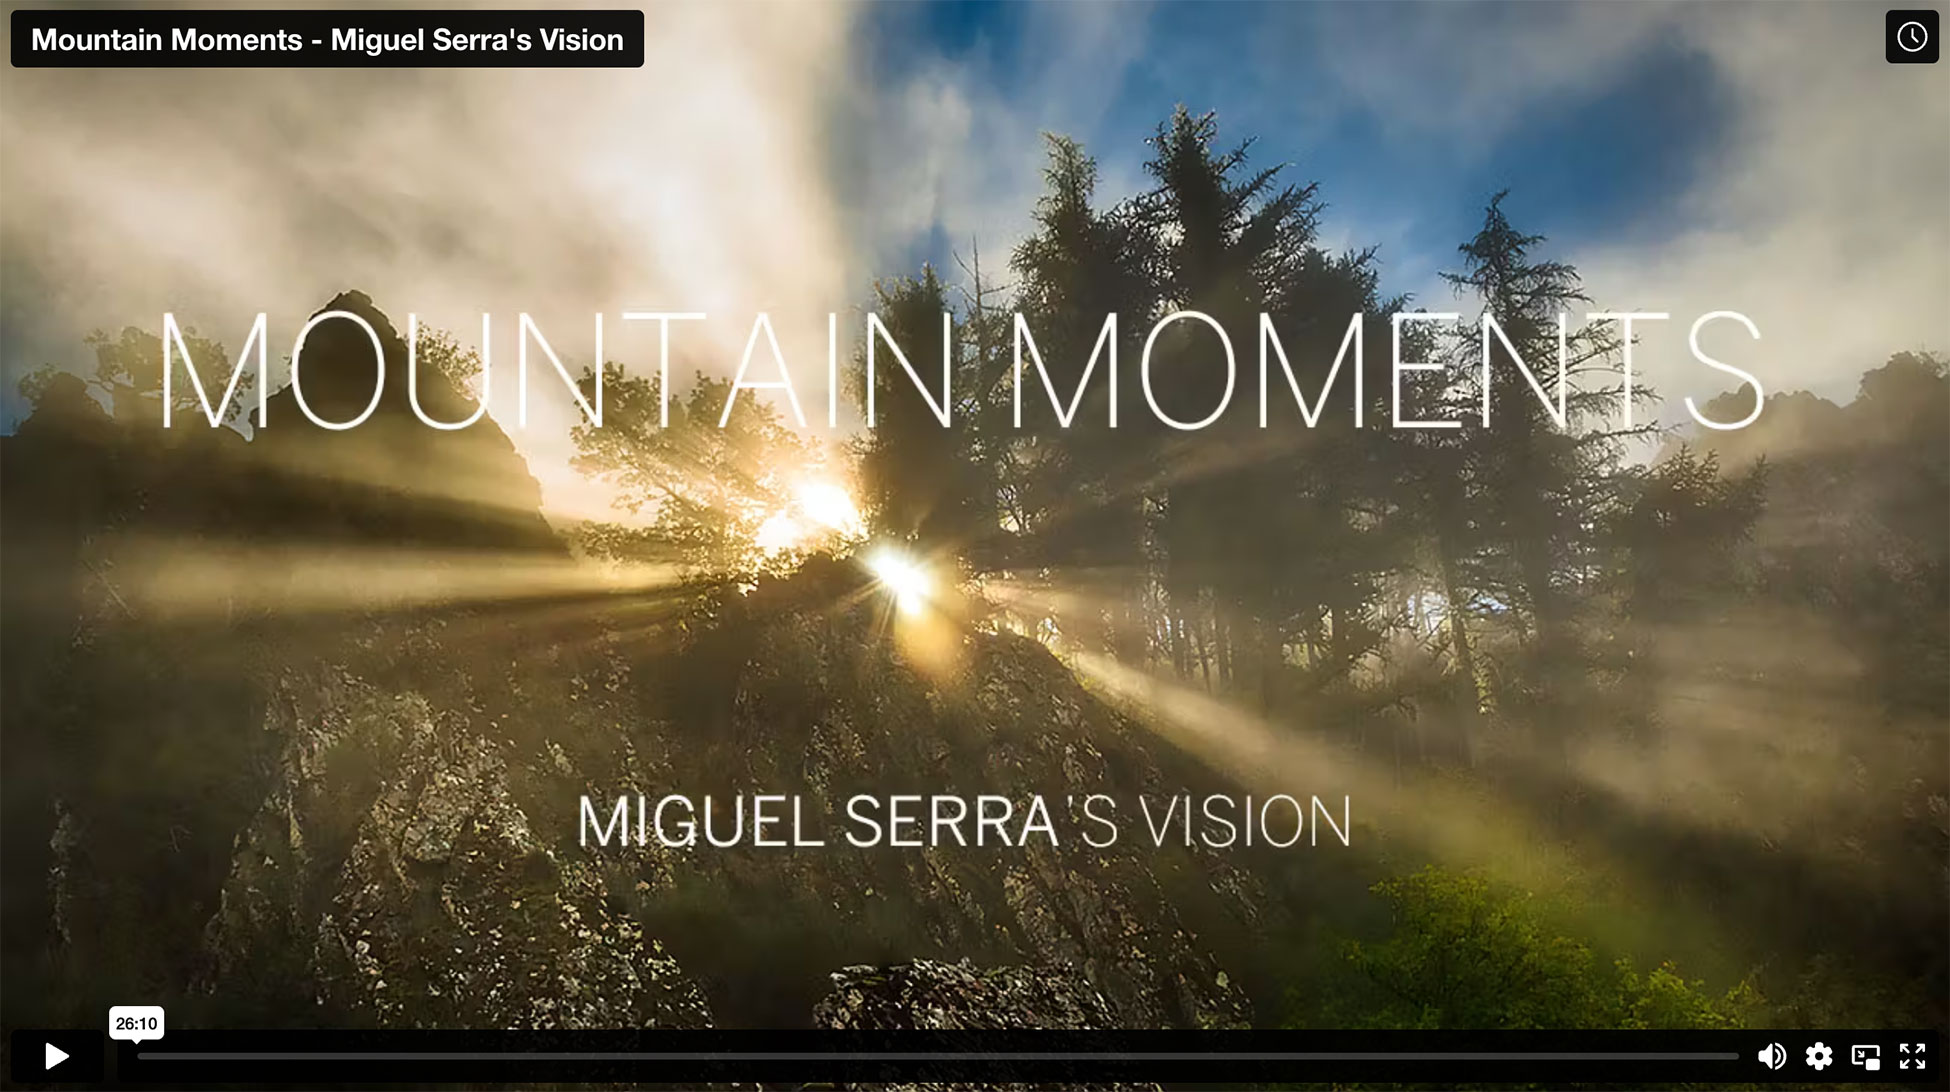 MOVIE: “Mountain Moments: Miguel Serra’s Vision” – Join this landscape photographer for unforgettable moments